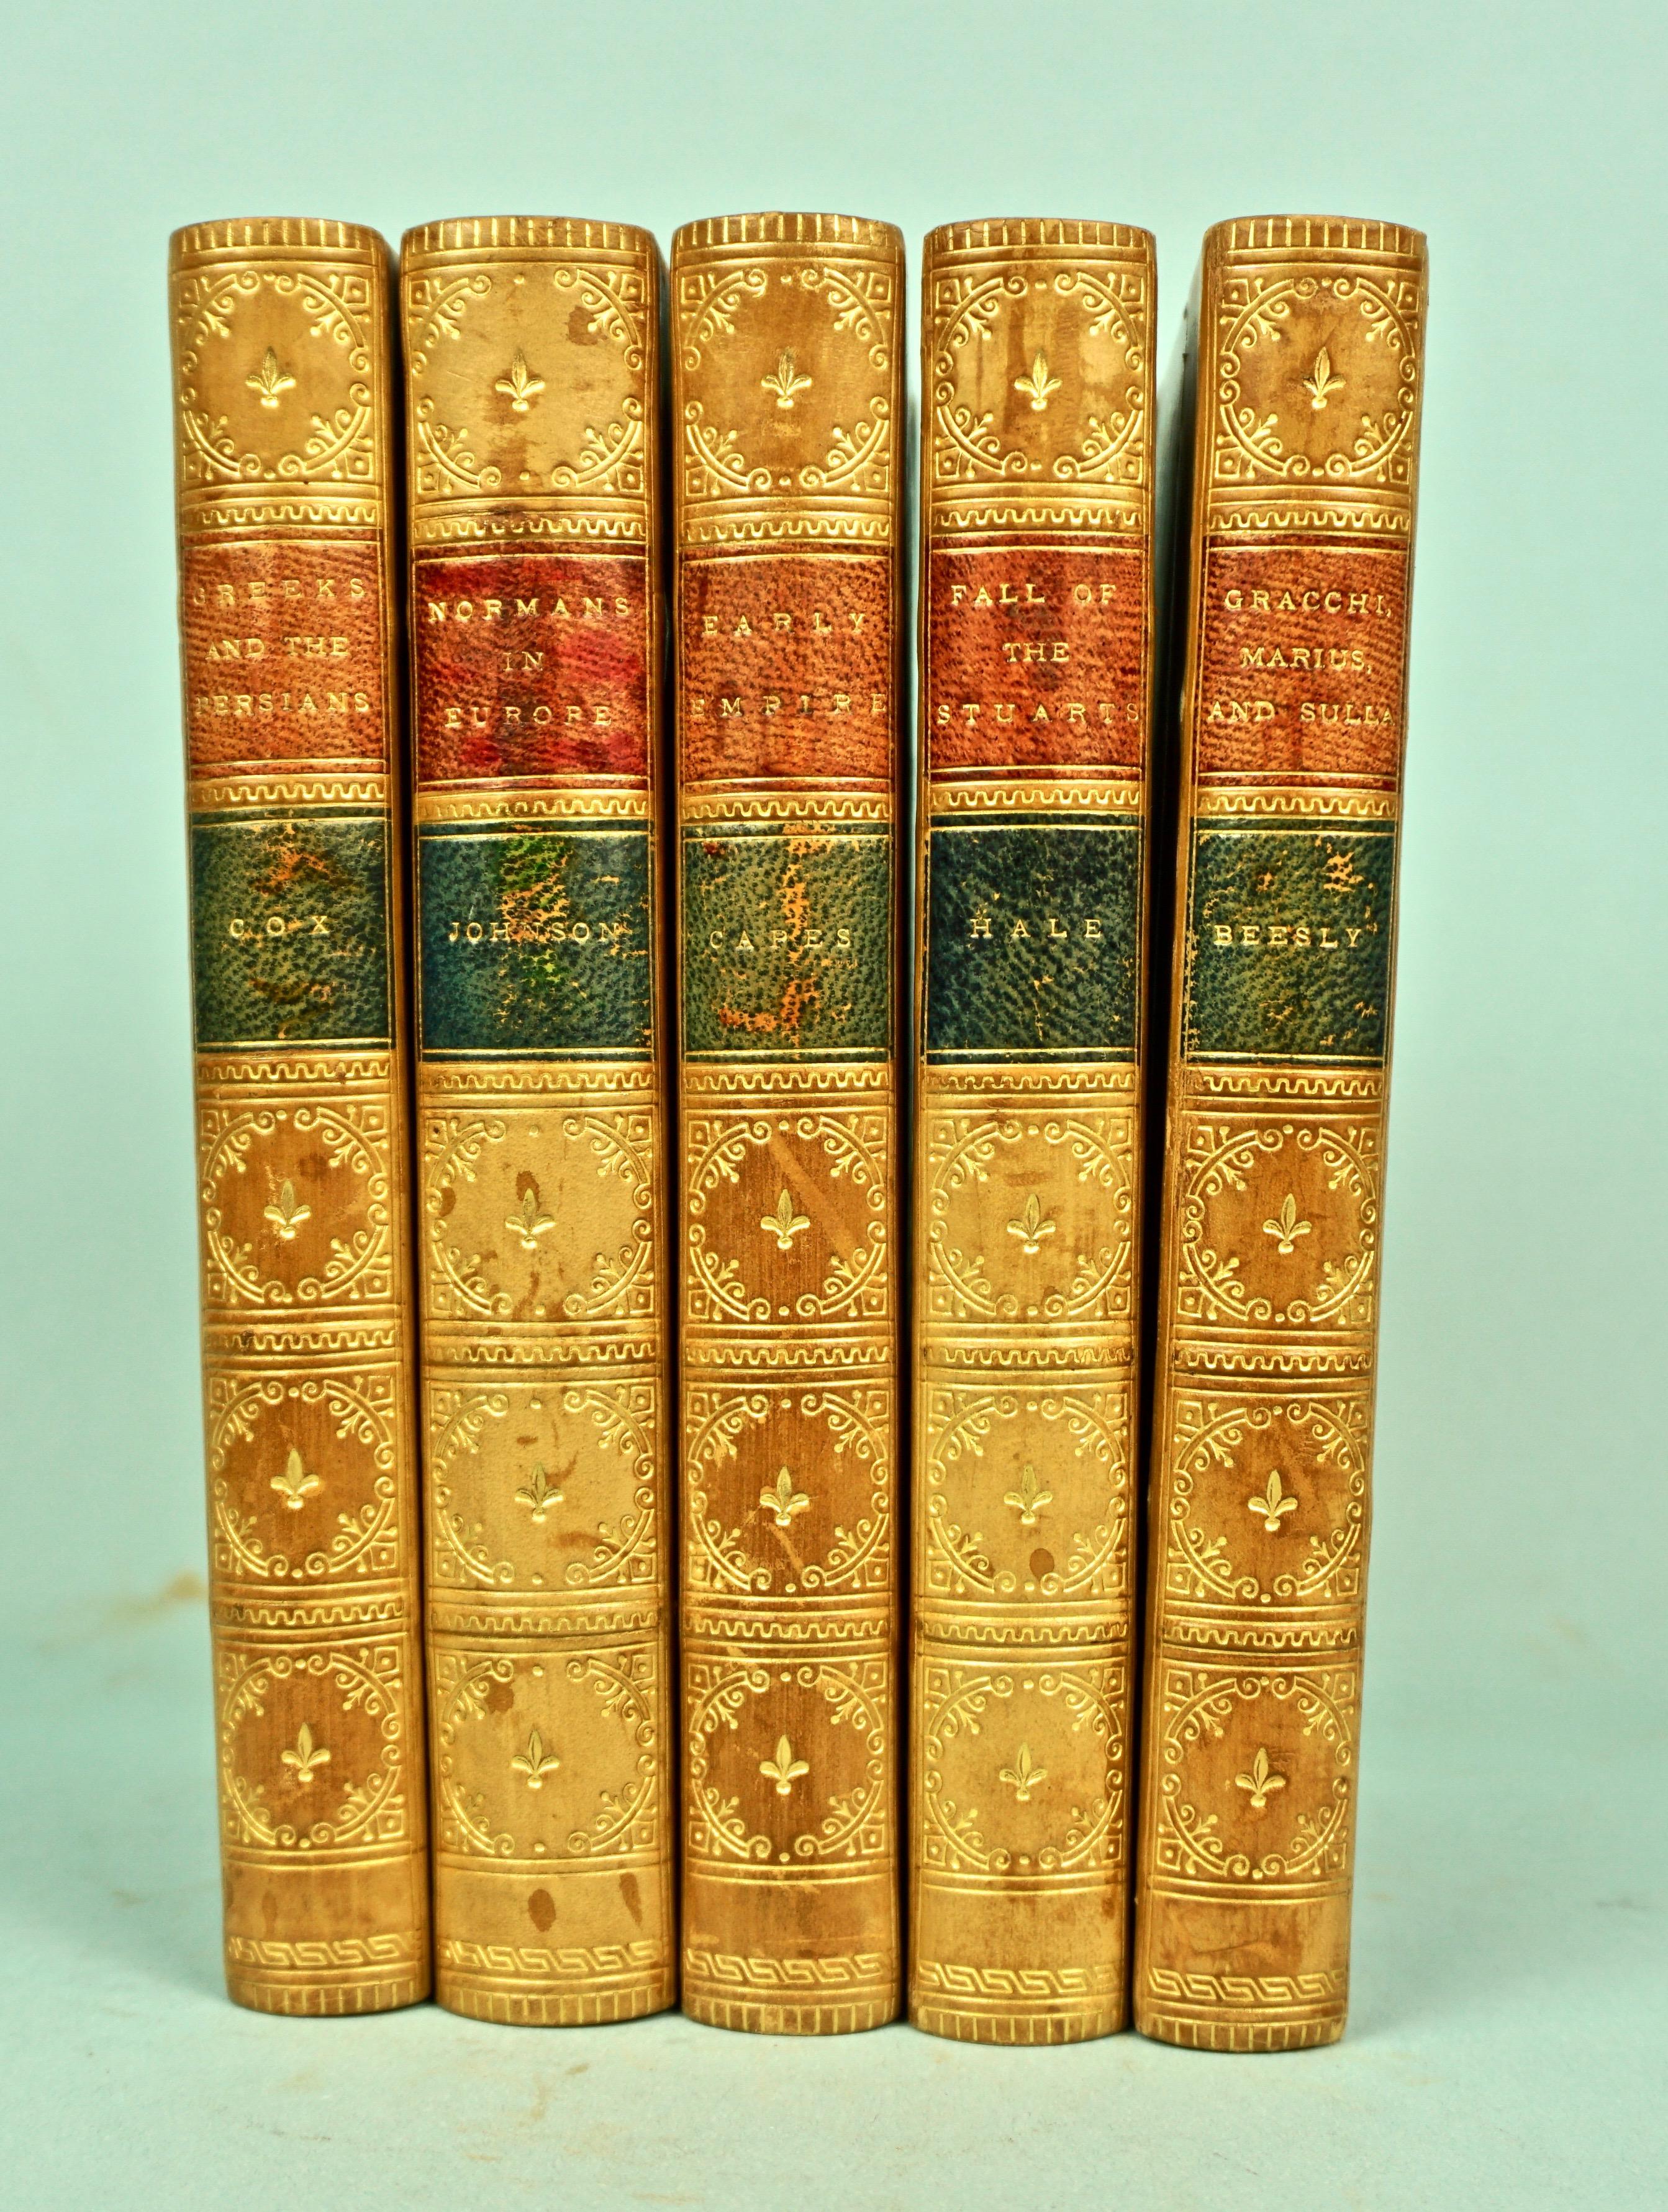 Victorian Epochs of Ancient History in 20 Volumes Bound in Tan Leather